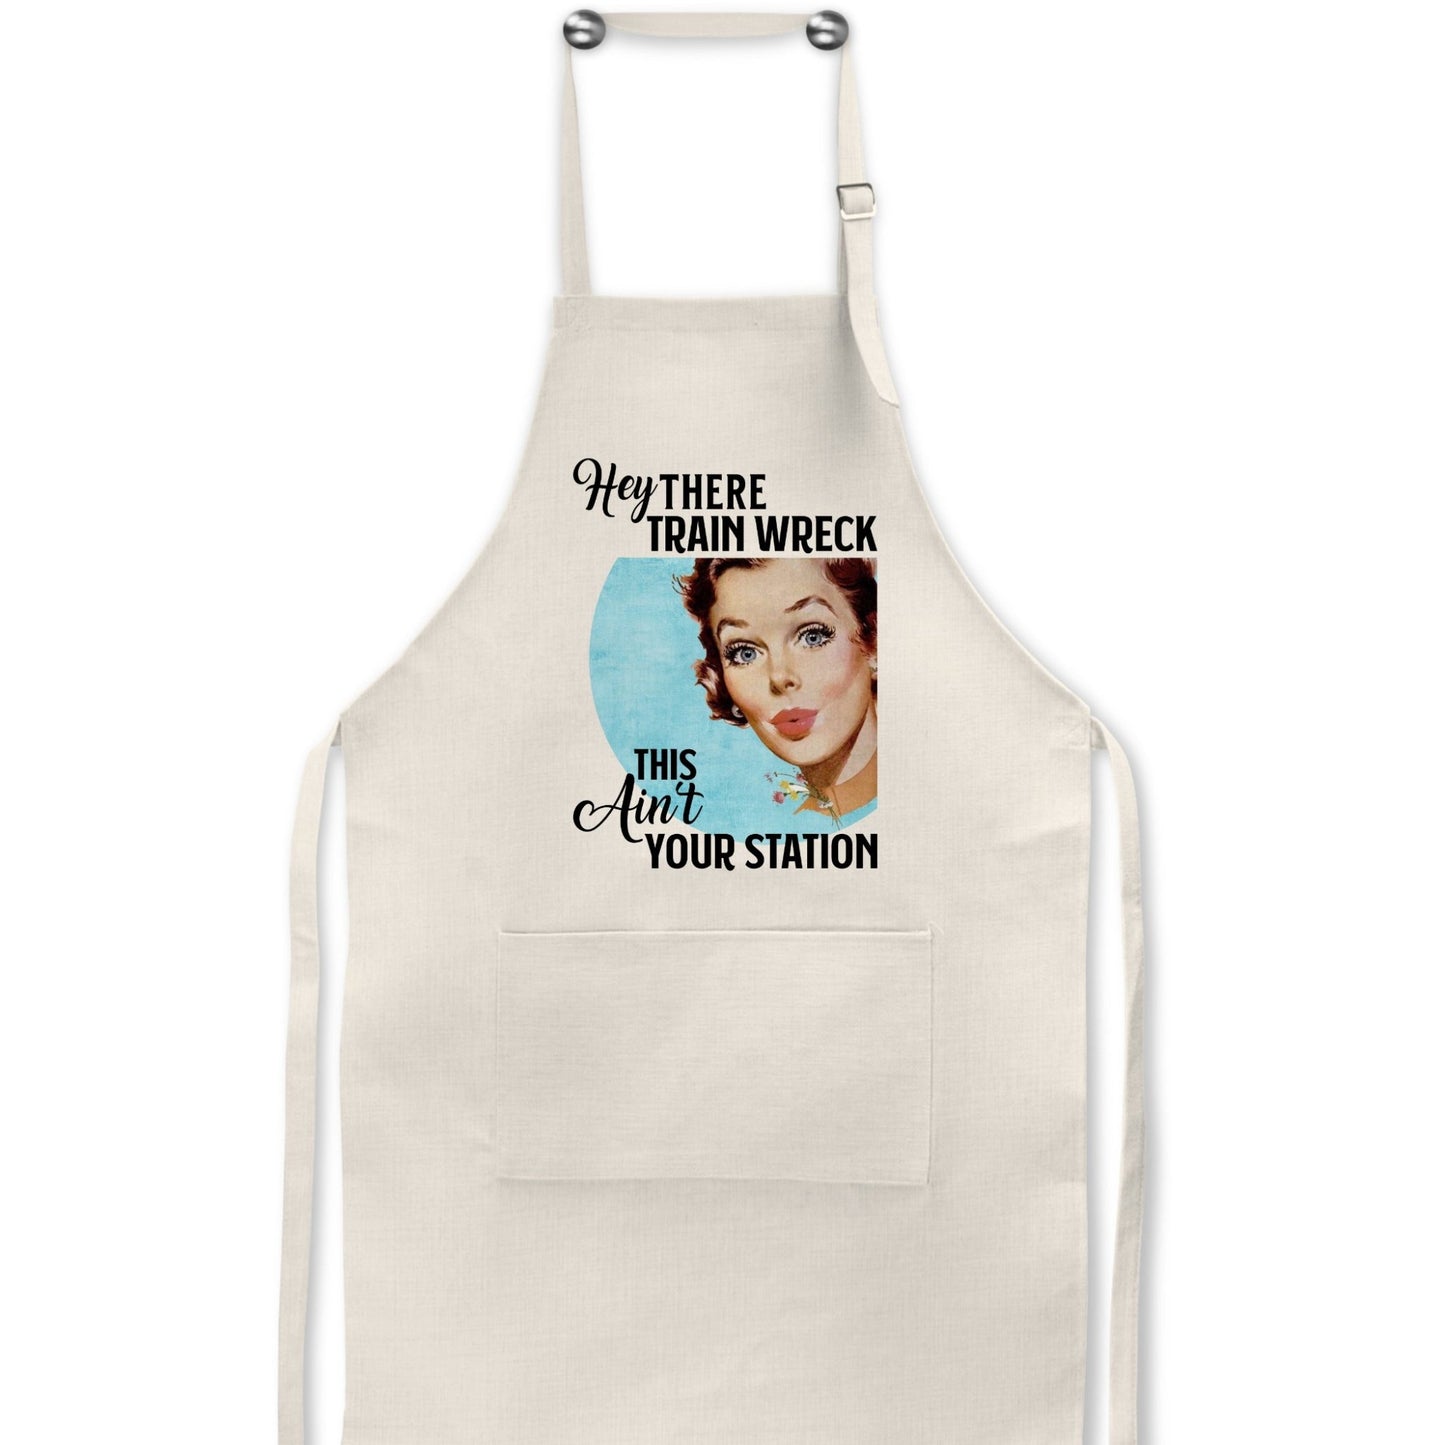 Hey There Train Wreck This Ain't Your Station - Retro Housewife Linen Apron - Jammin Threads